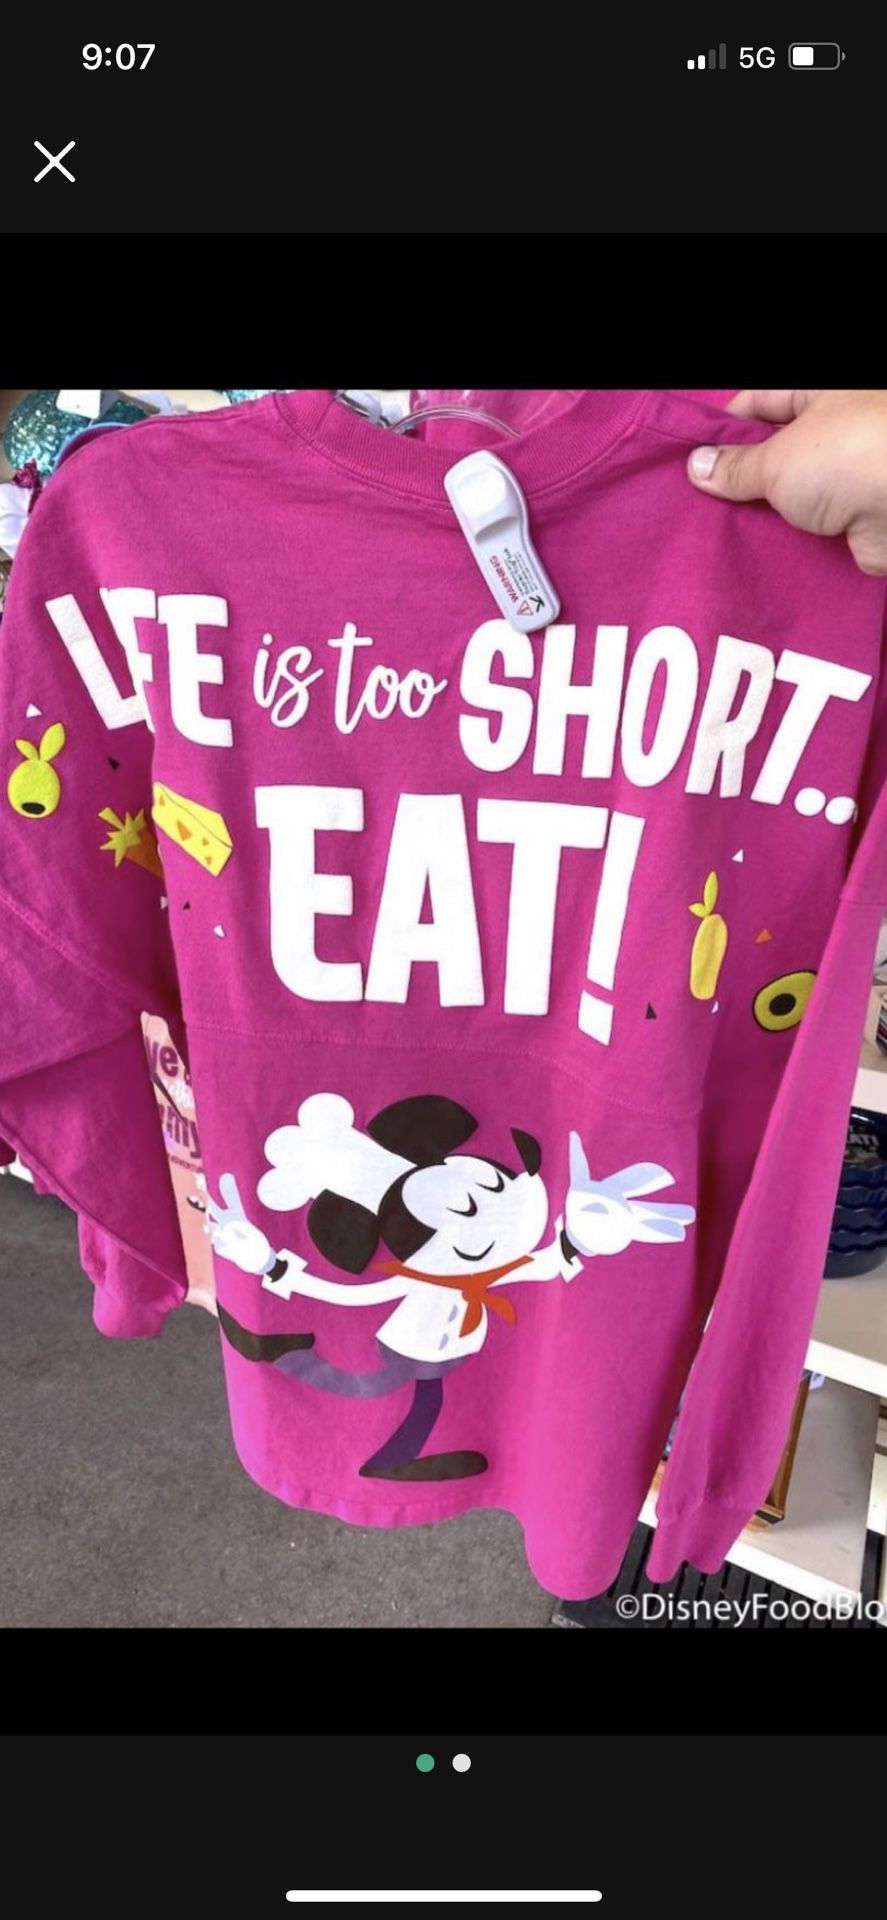 Disney Parks Life is Too Short to Eat,”Food & Wine Festival Spirit Jersey Size Large NWT Serious inquiries only please  Low offers will be ignored  Pi